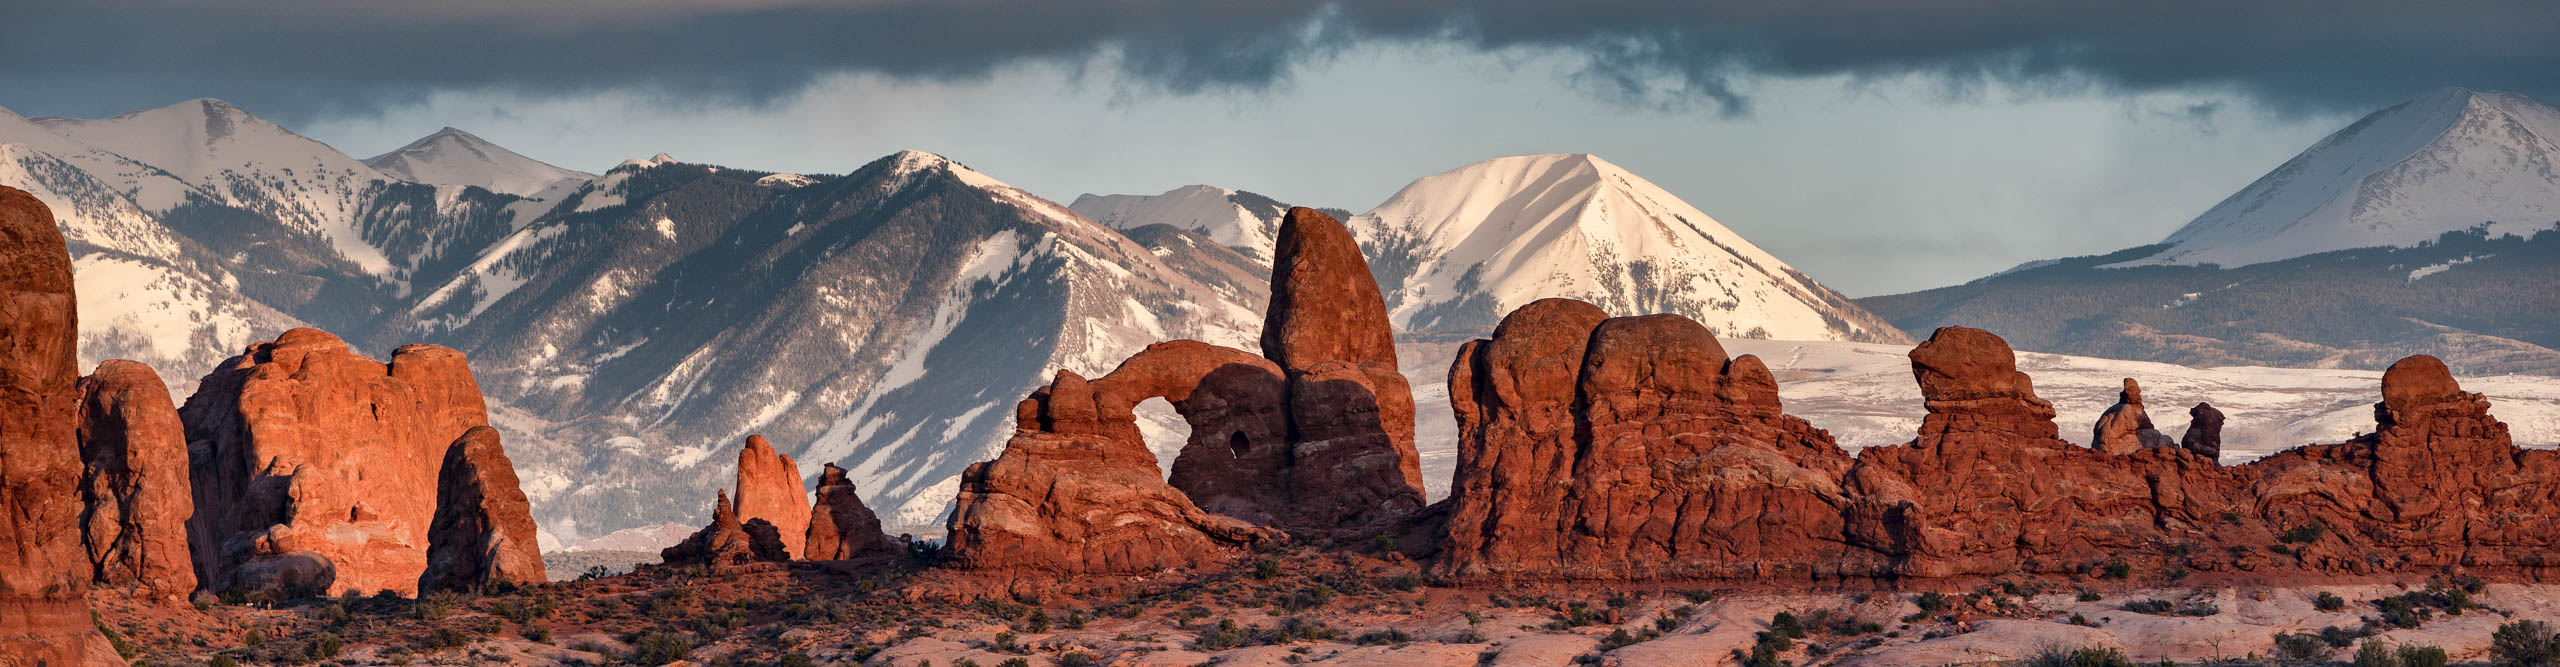 Turret Arch, Arches National Park with snow covered La Salle mountains in the background, at sunset 